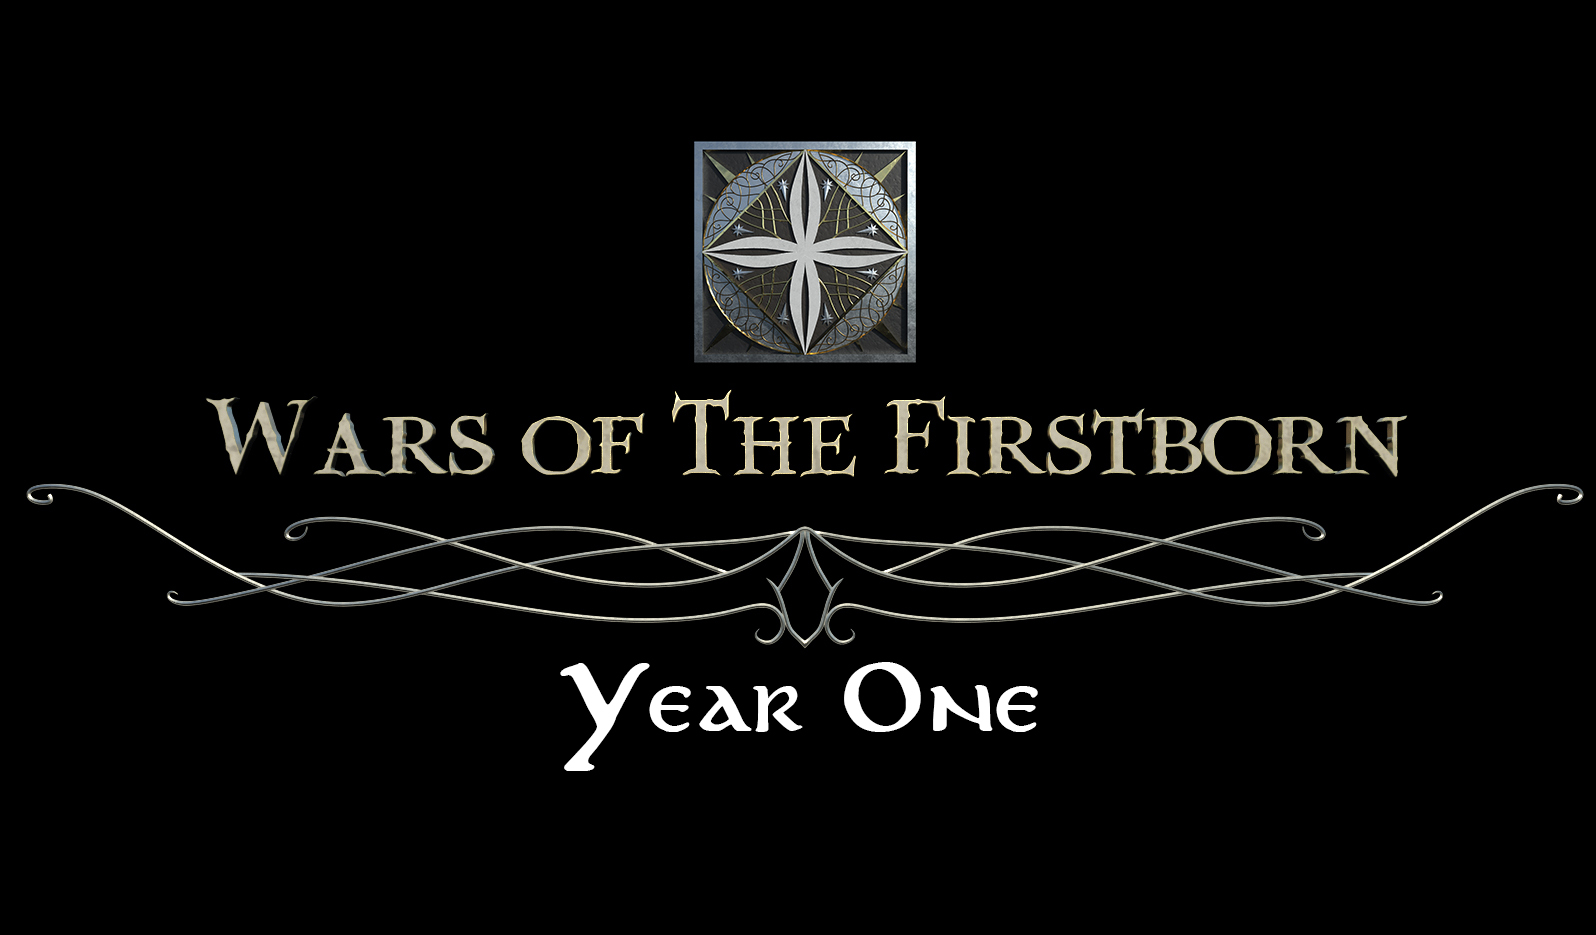 Wars of the Firstborn: Year One news - ModDB